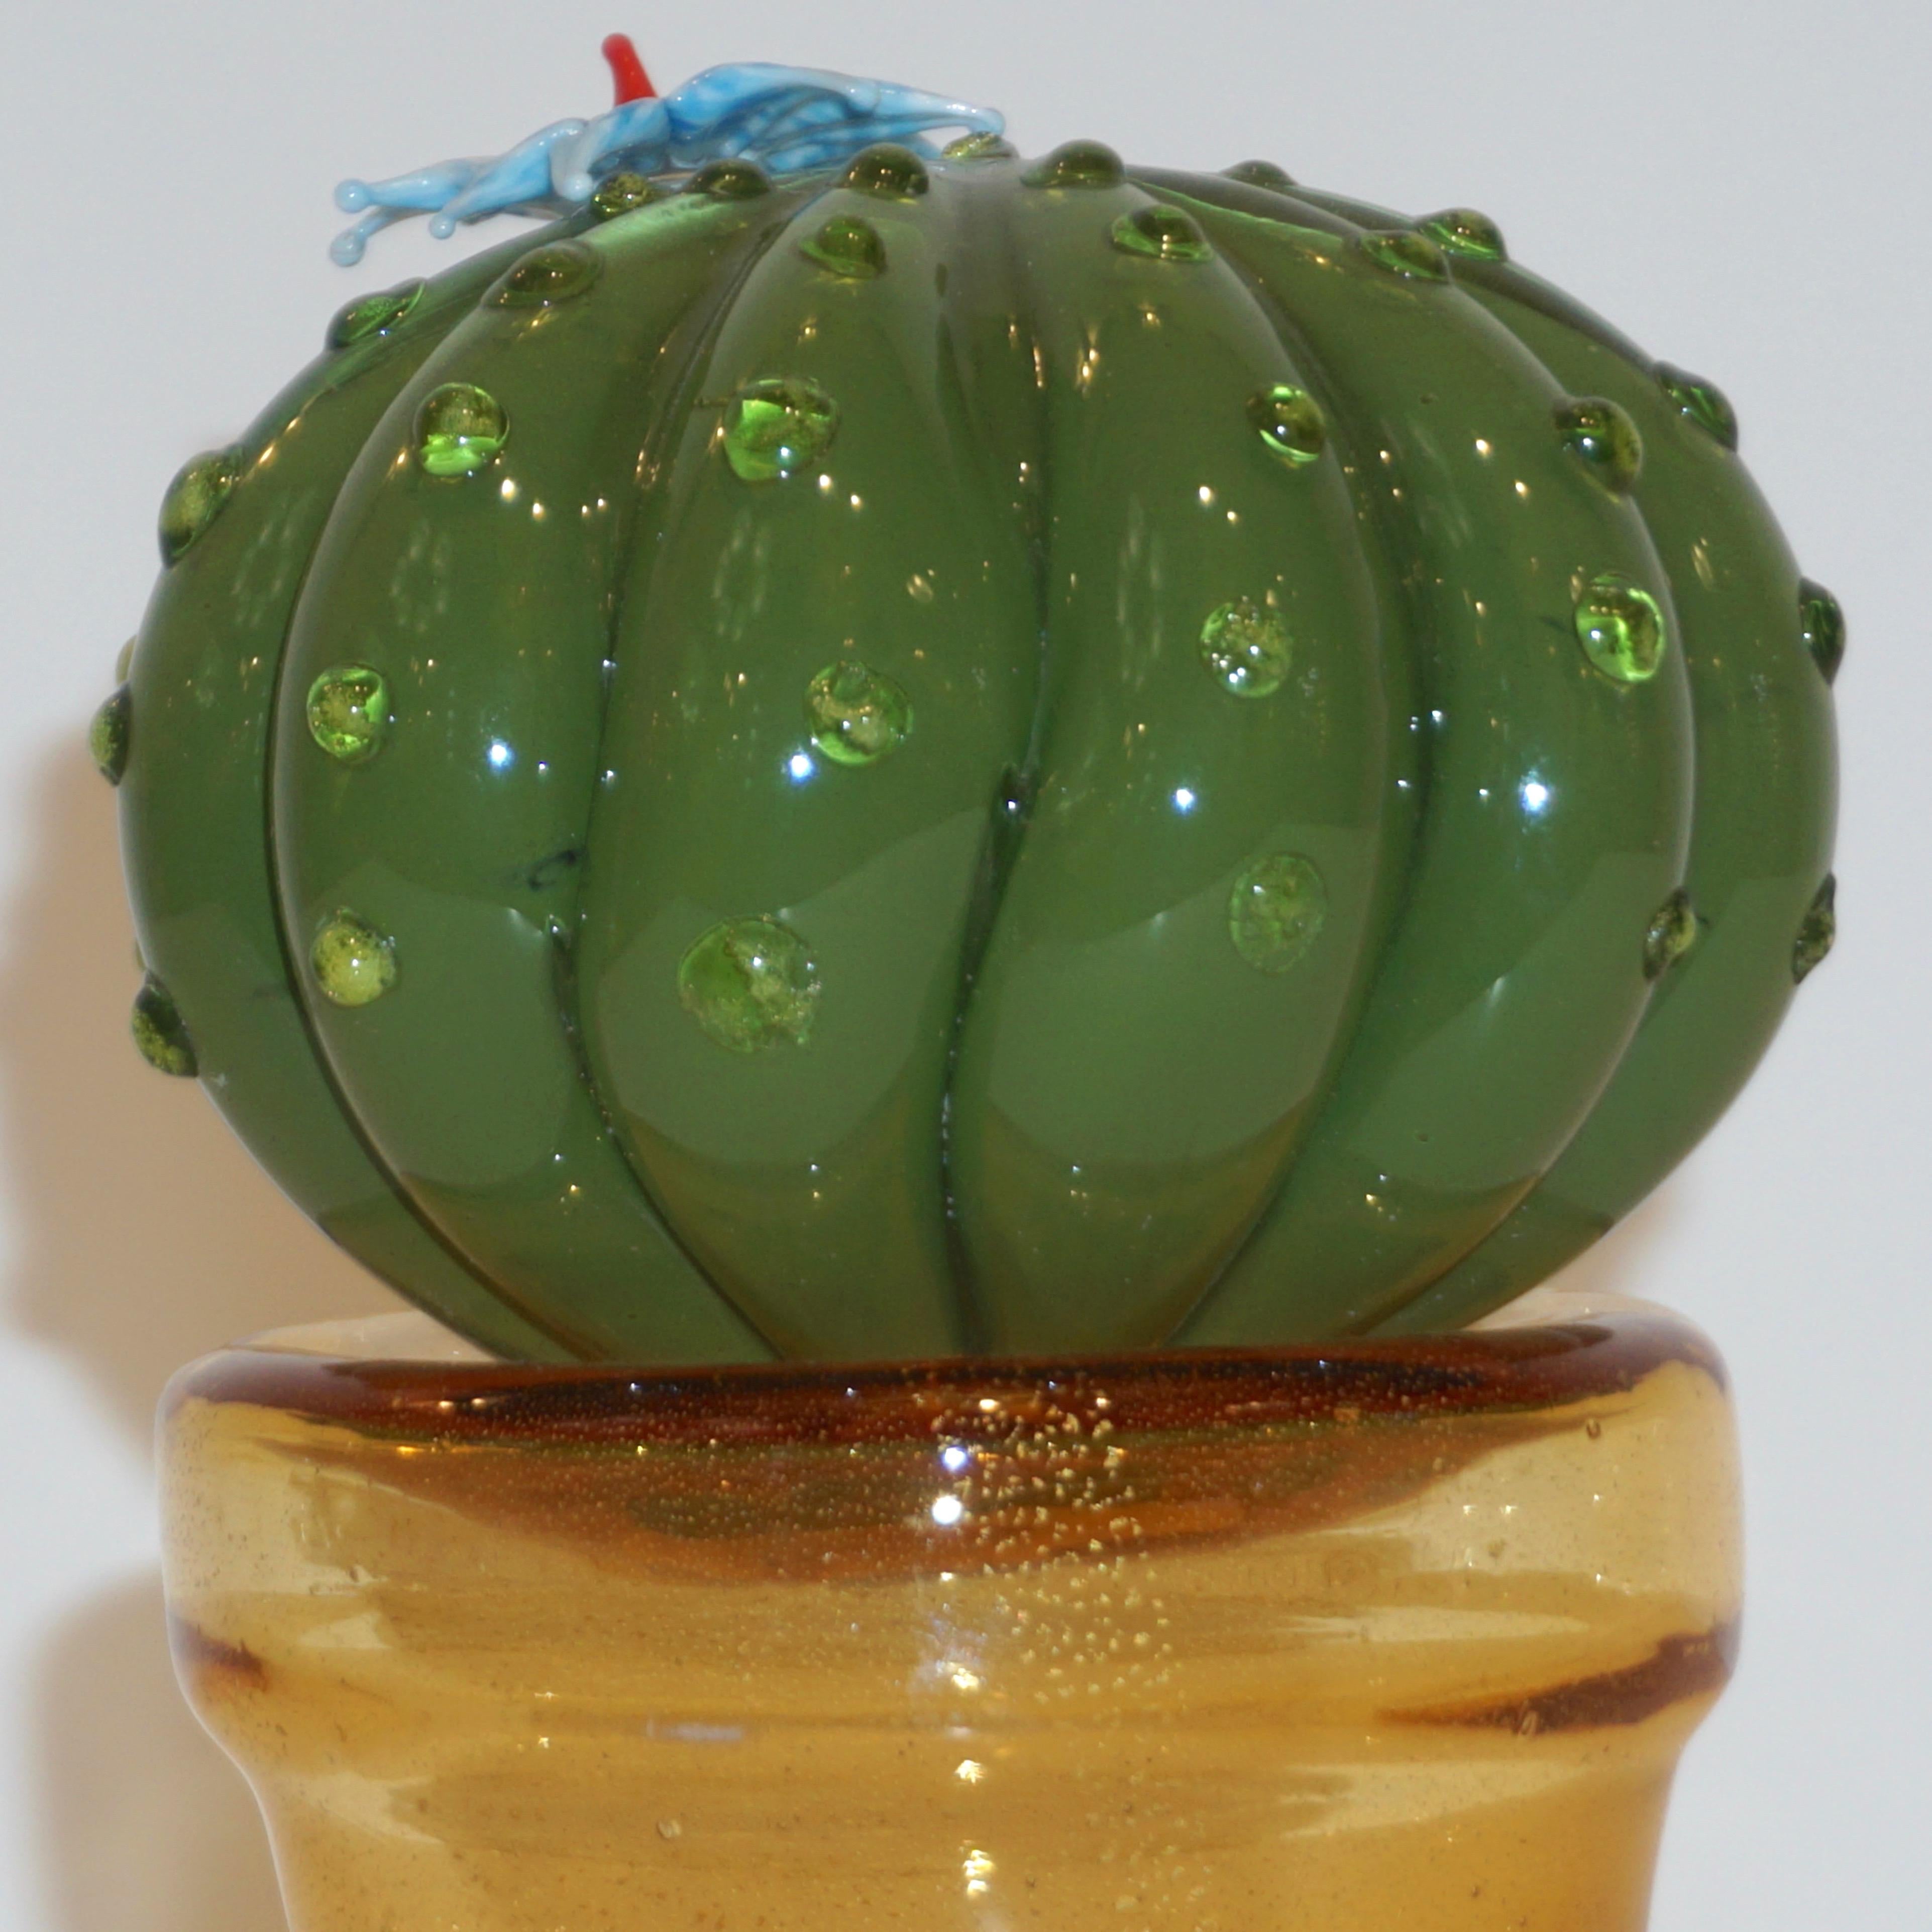 Organic Modern 1990s Vintage Italian Green Murano Glass Small Cactus Plant with Blue Flower